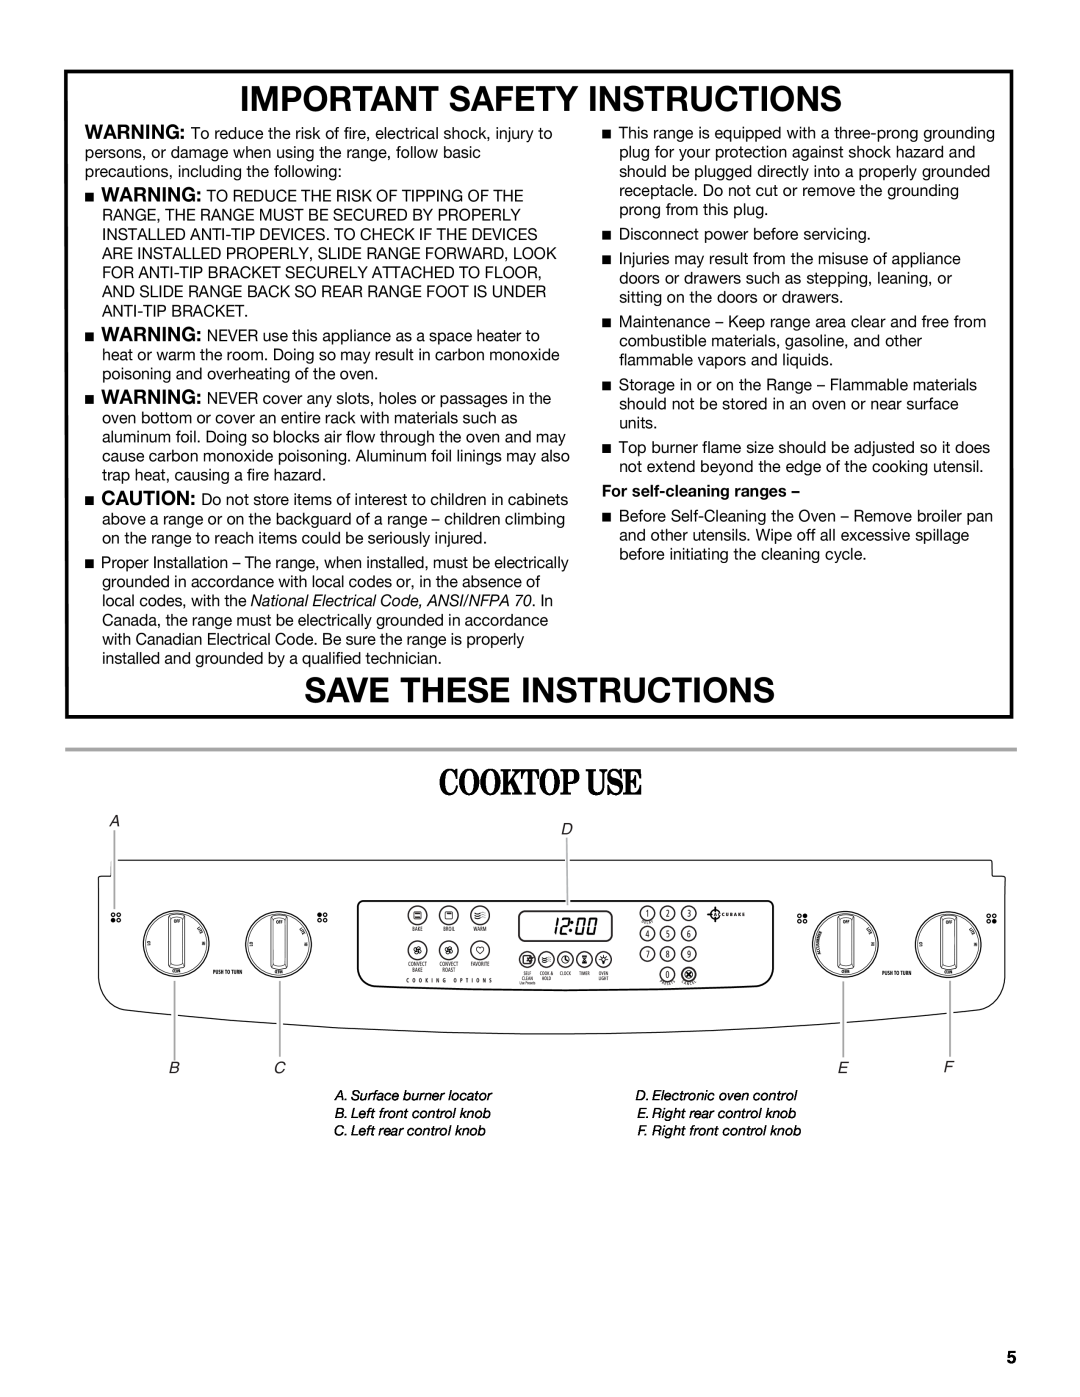 Whirlpool GW397LXU manual Cooktop Use, Important Safety Instructions, Save These Instructions 